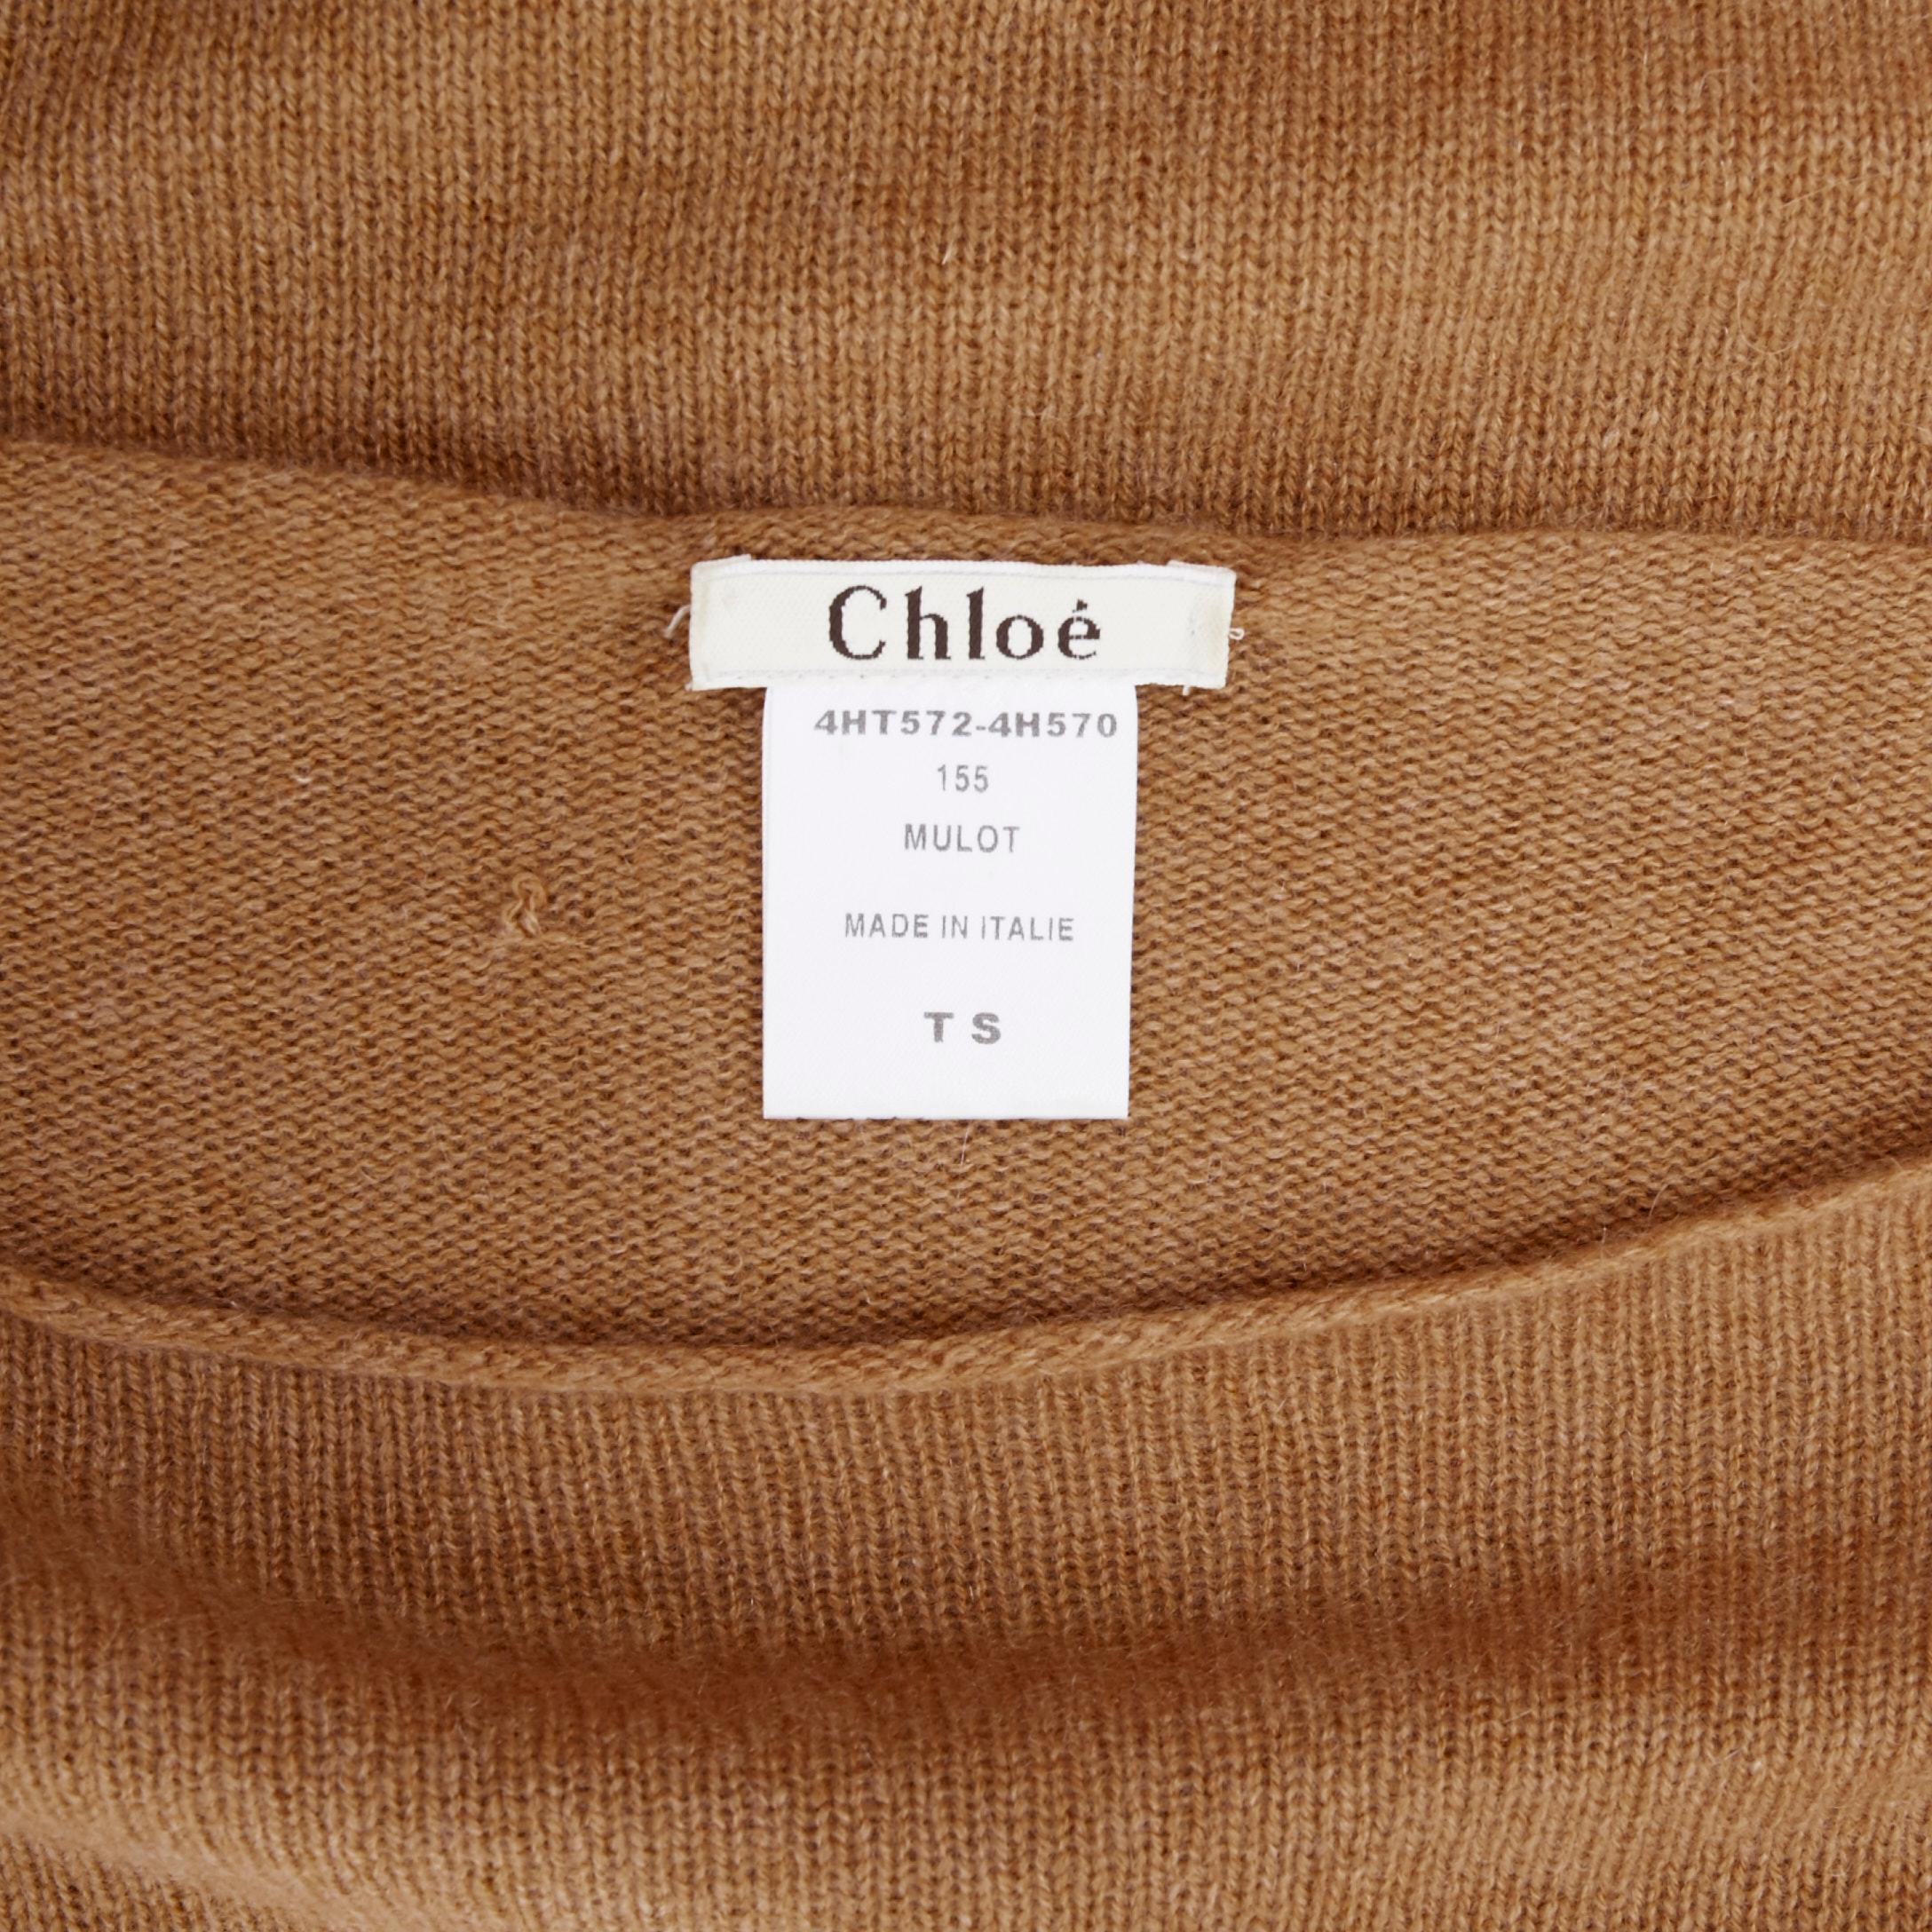 CHLOE 100% cashmere camel brown wide boat neck ladder stitch sweater top S 5